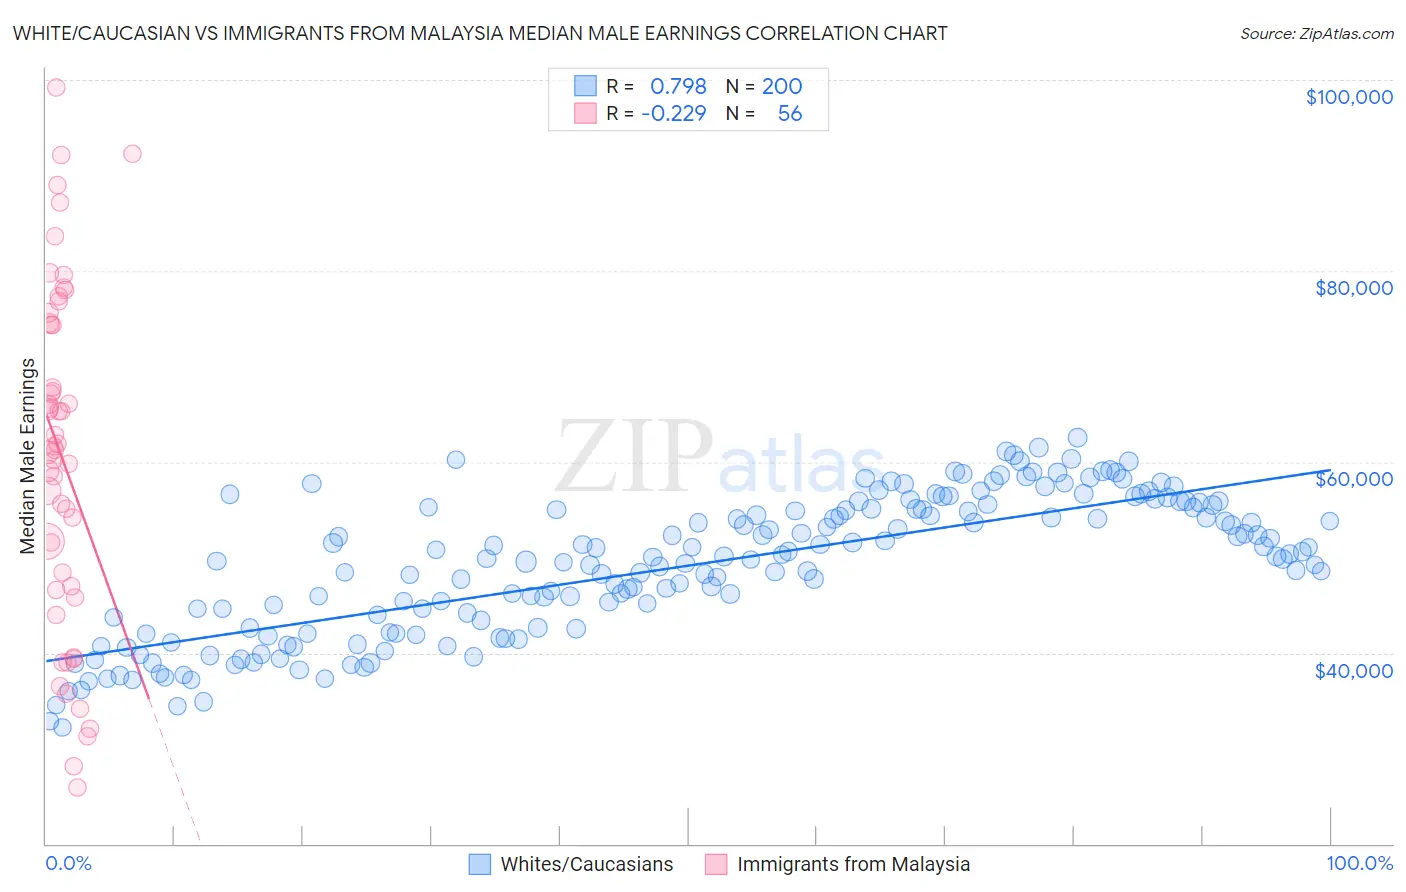 White/Caucasian vs Immigrants from Malaysia Median Male Earnings